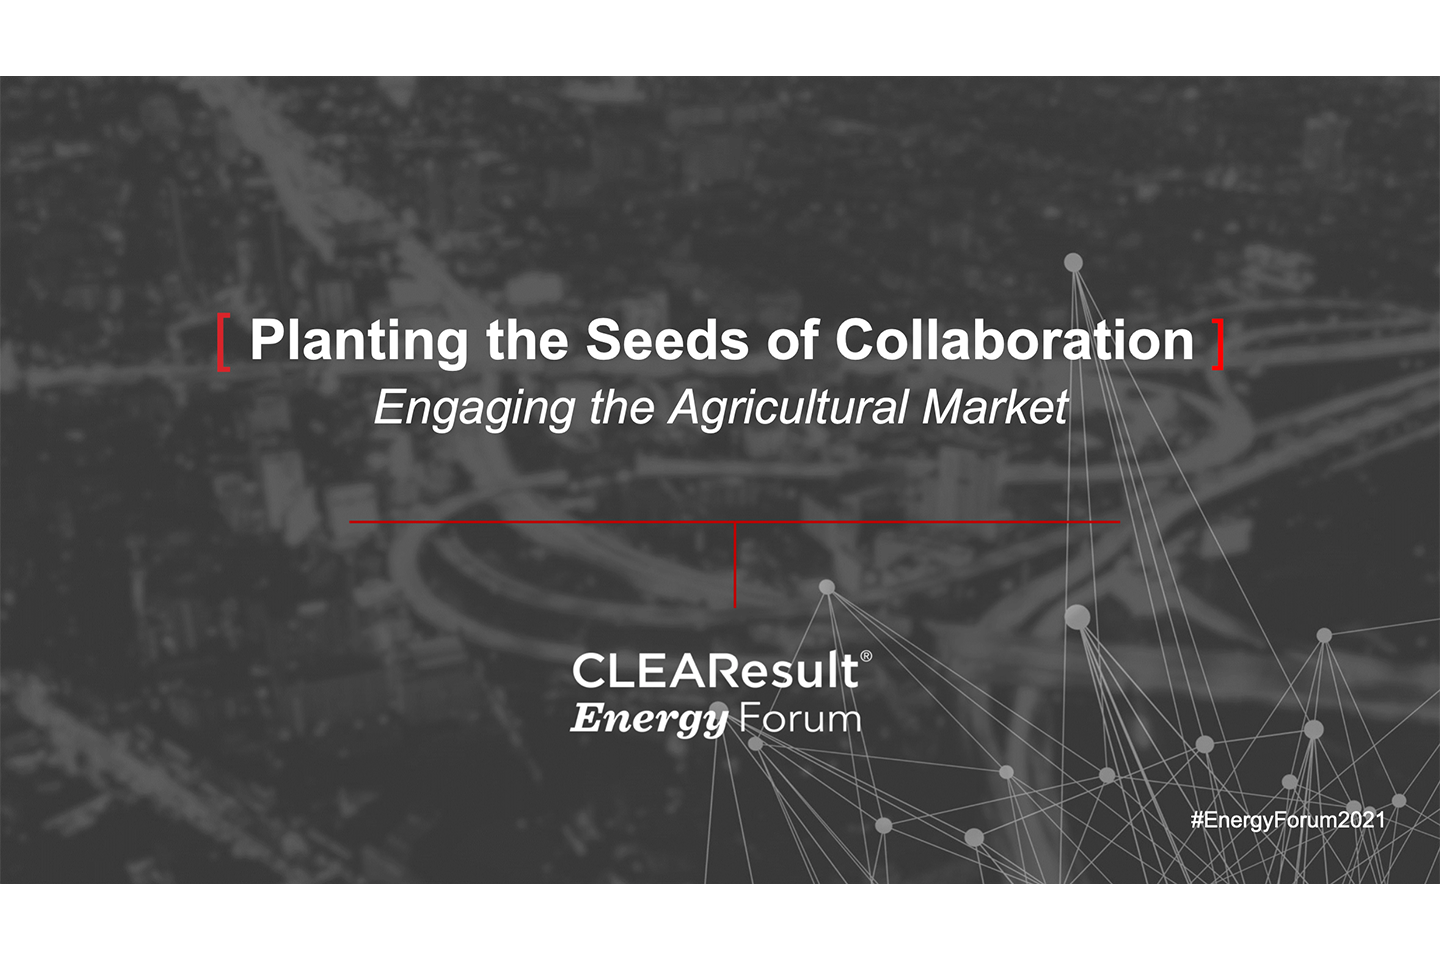 Planting the Seeds of Collaboration: Engaging the Agriculture Market